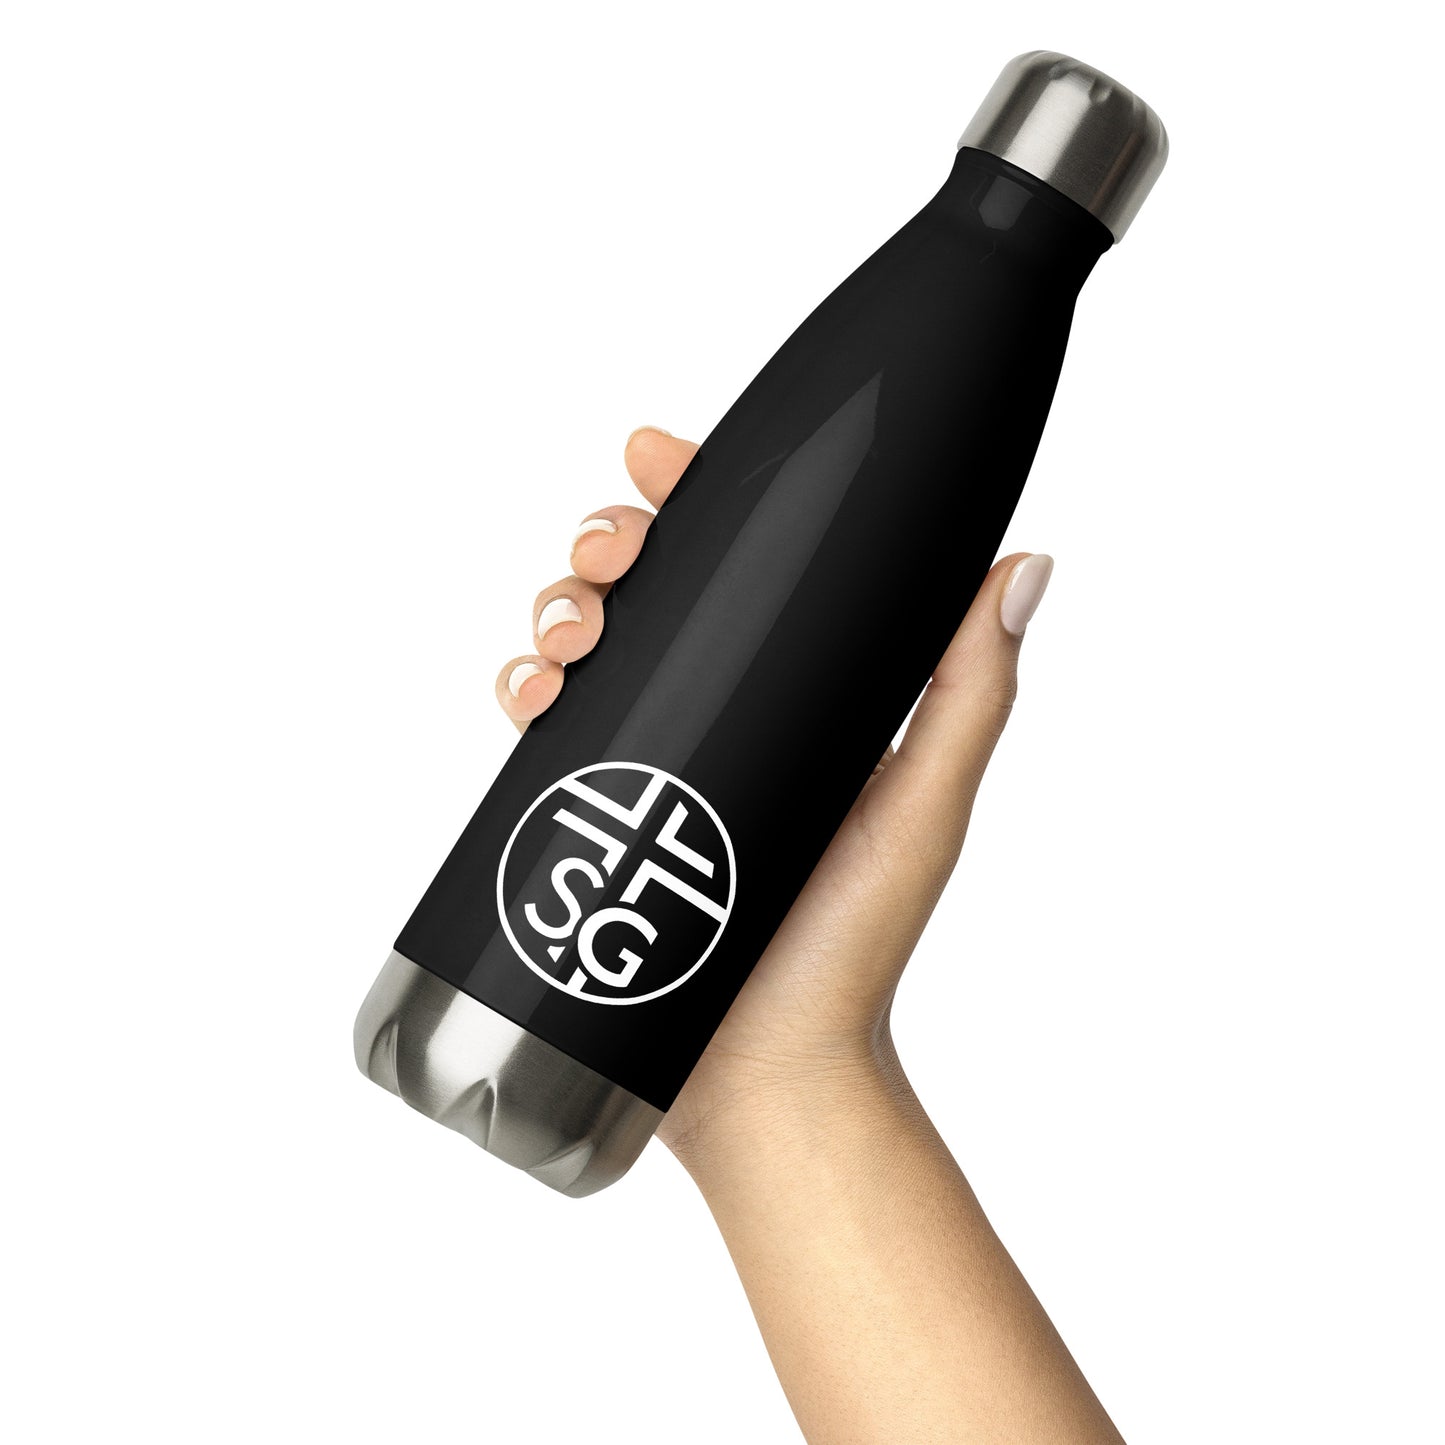 SG Stainless Steel Water Bottle